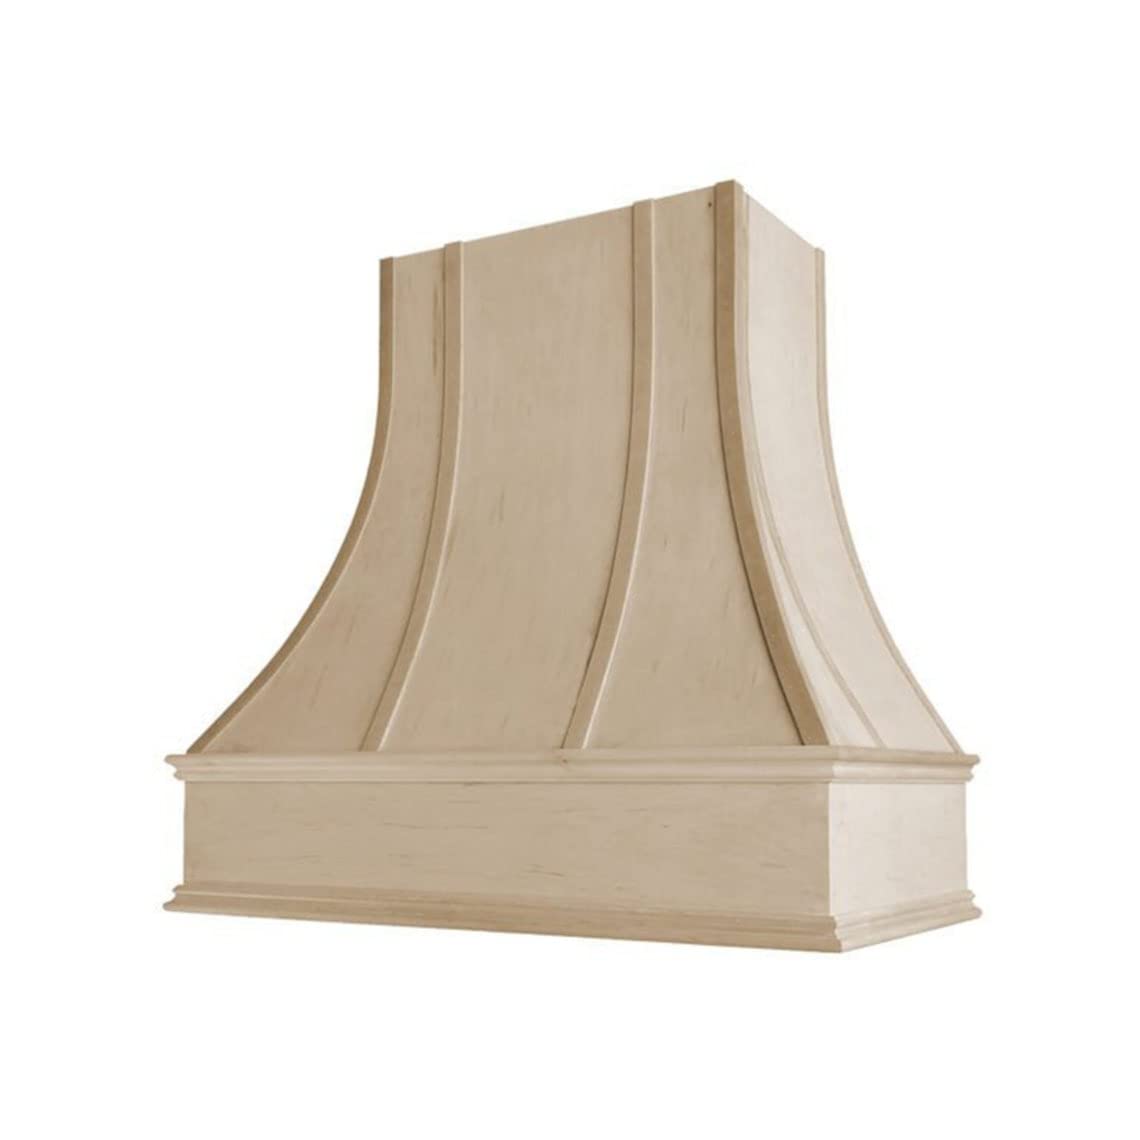 Riley & Higgs curved Front Unfinished Range Hood cover With Decorative Molding - Wall Mounted Wood Range Hood covers, Plywood an